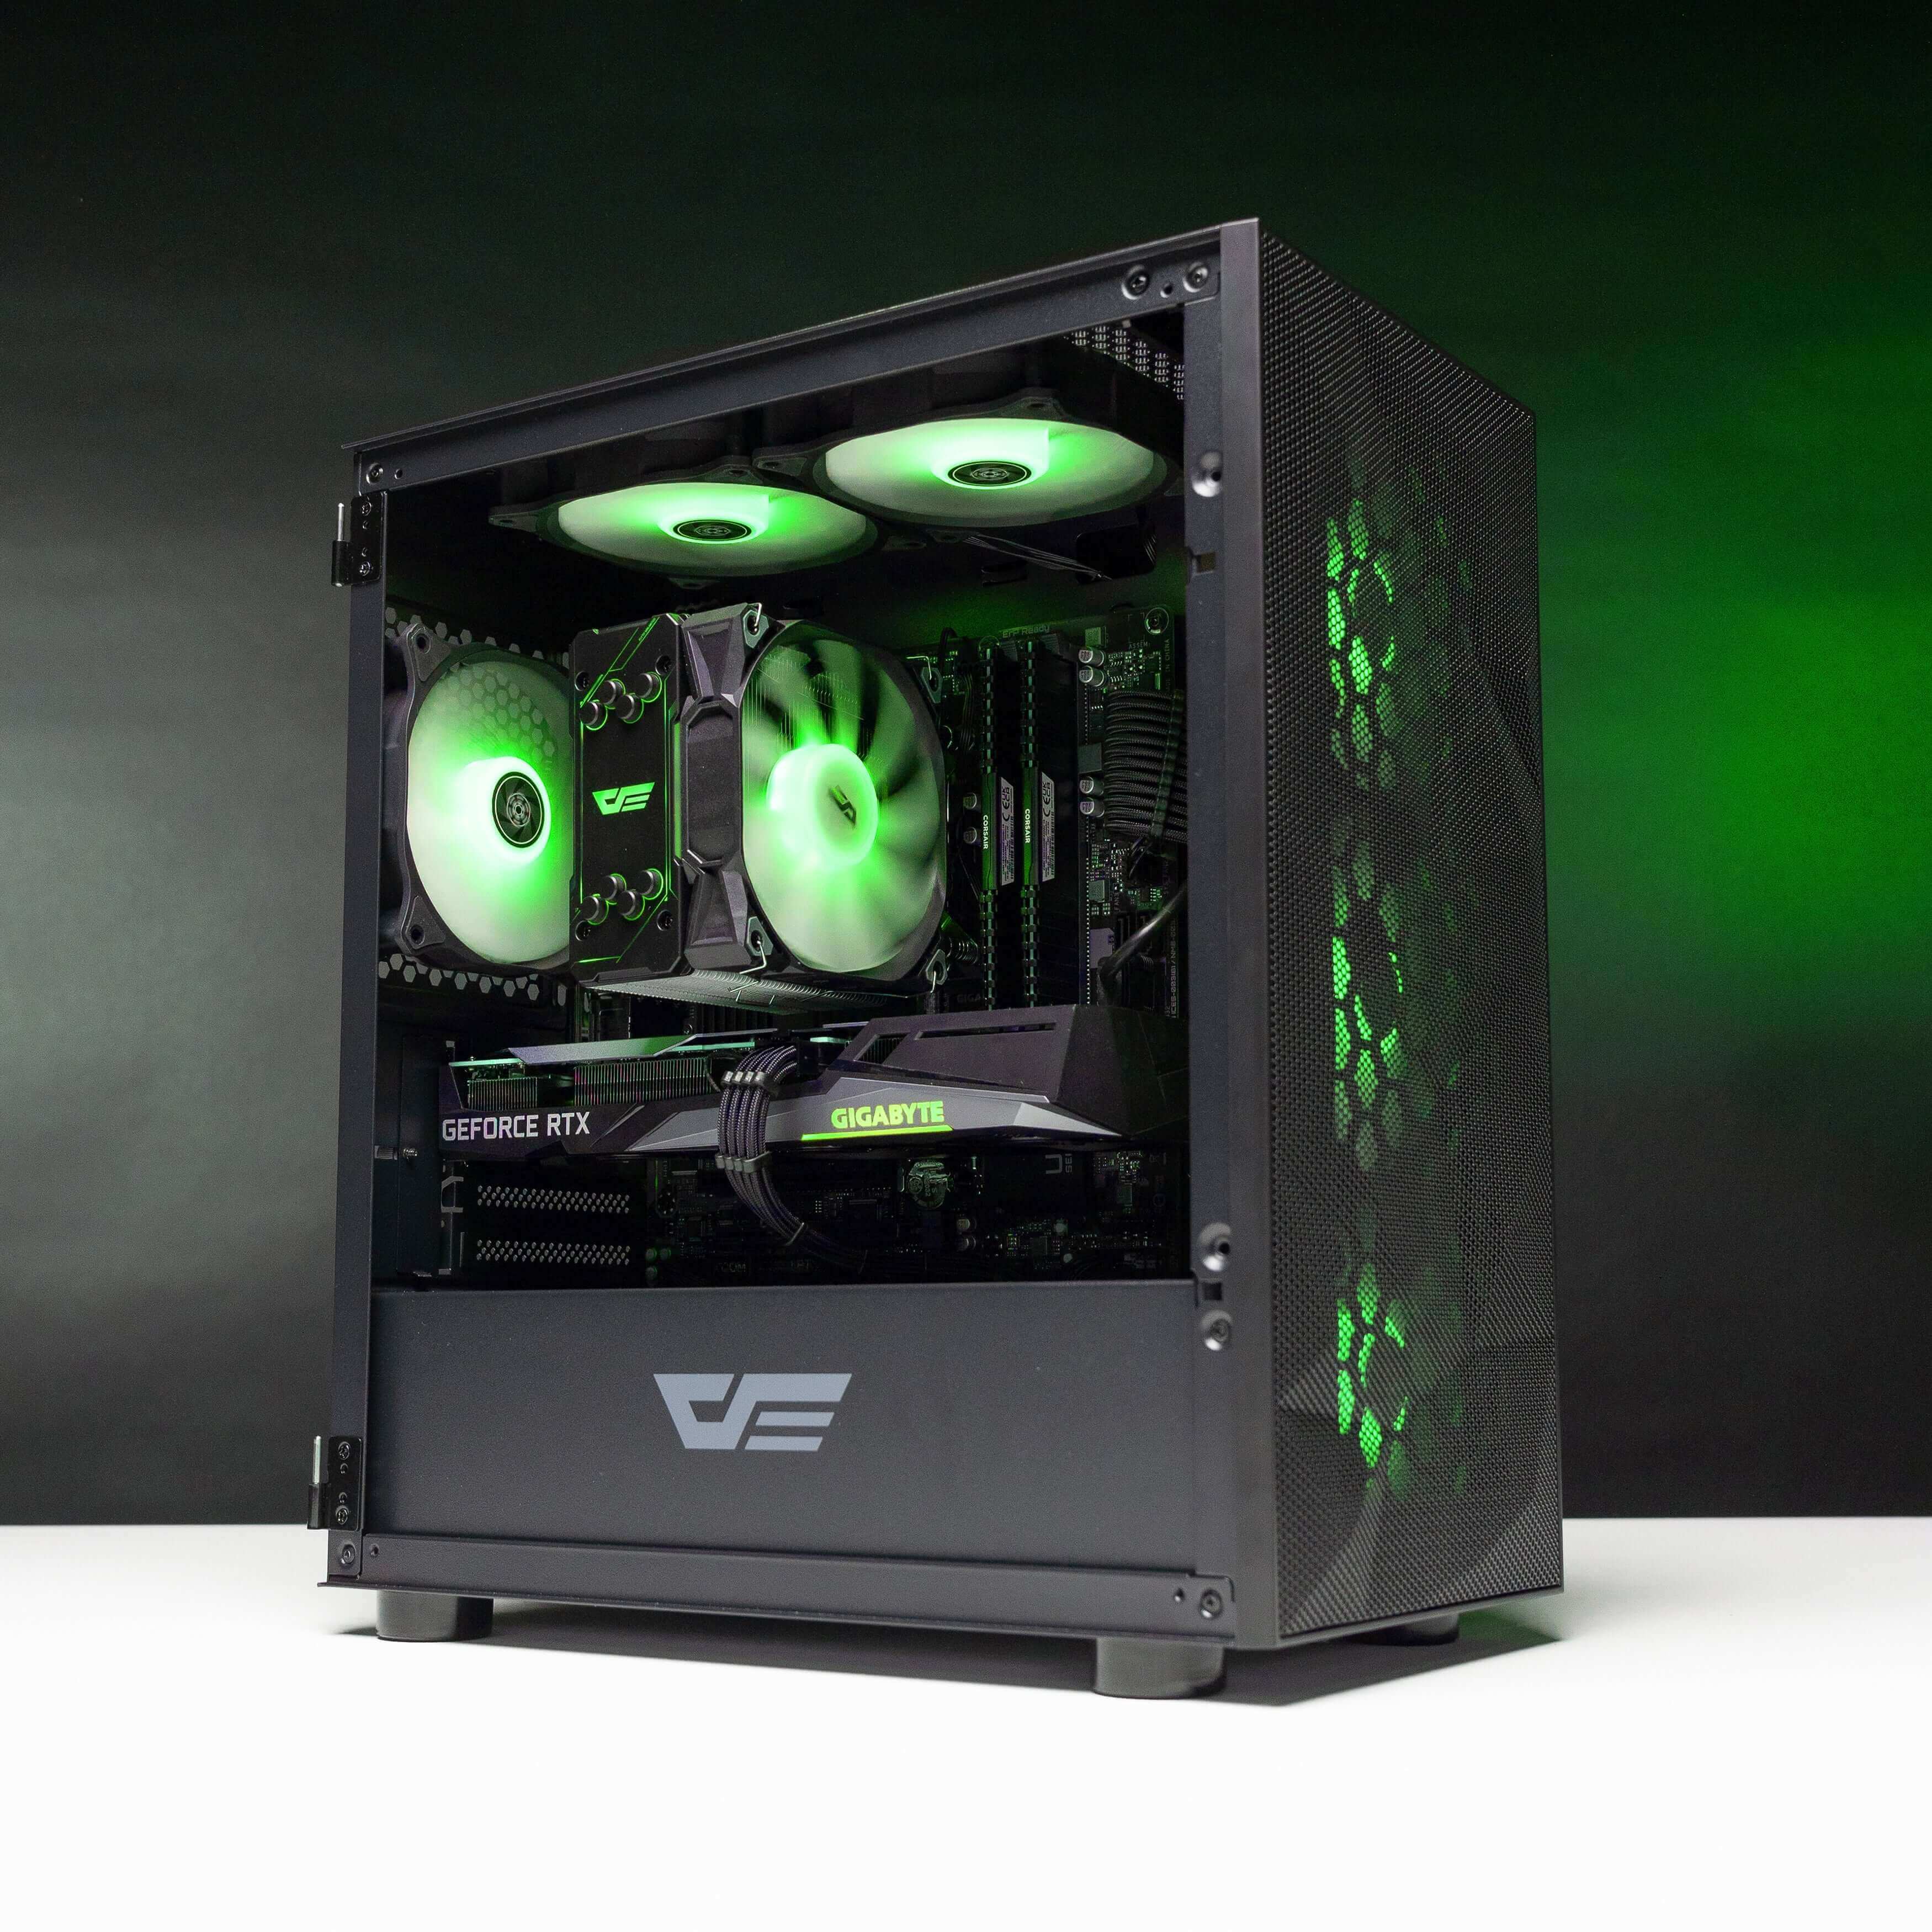 The TERROR: LVL 7 (Intel) Gaming PC incorporates the Darkair Pro CPU Cooler A-RGB Black, FSP Hydro K PRO 550W 80+ Bronze PSU, and DarkFlash DR-12 120mm ARGB fans x 6, enhancing cooling and providing stunning visual effects.